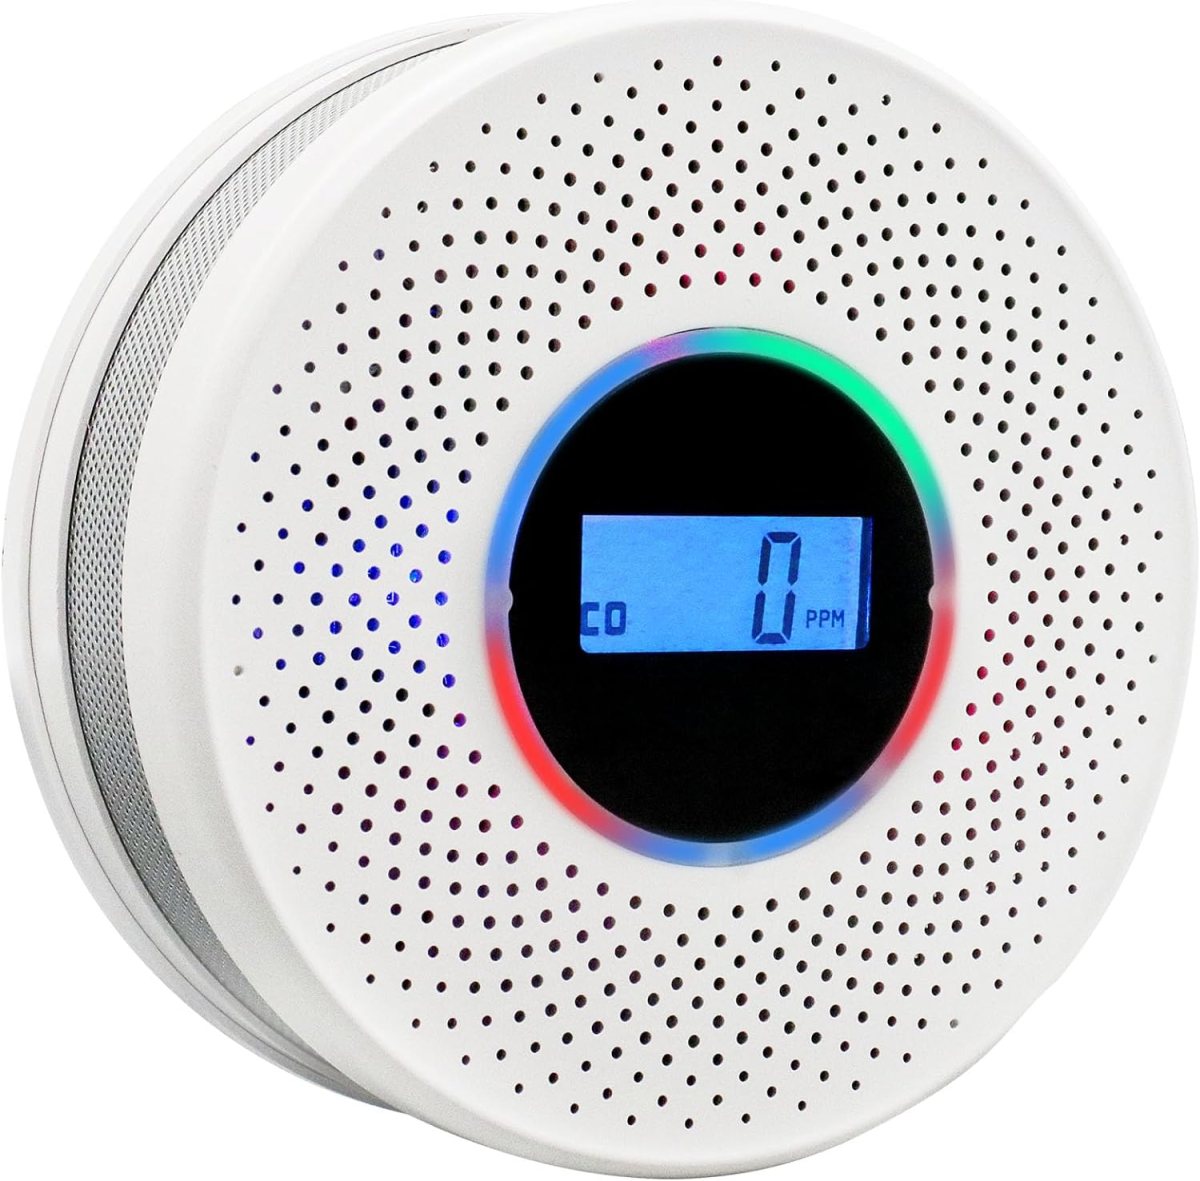 A round smoke detector with light up display sits against a white background.